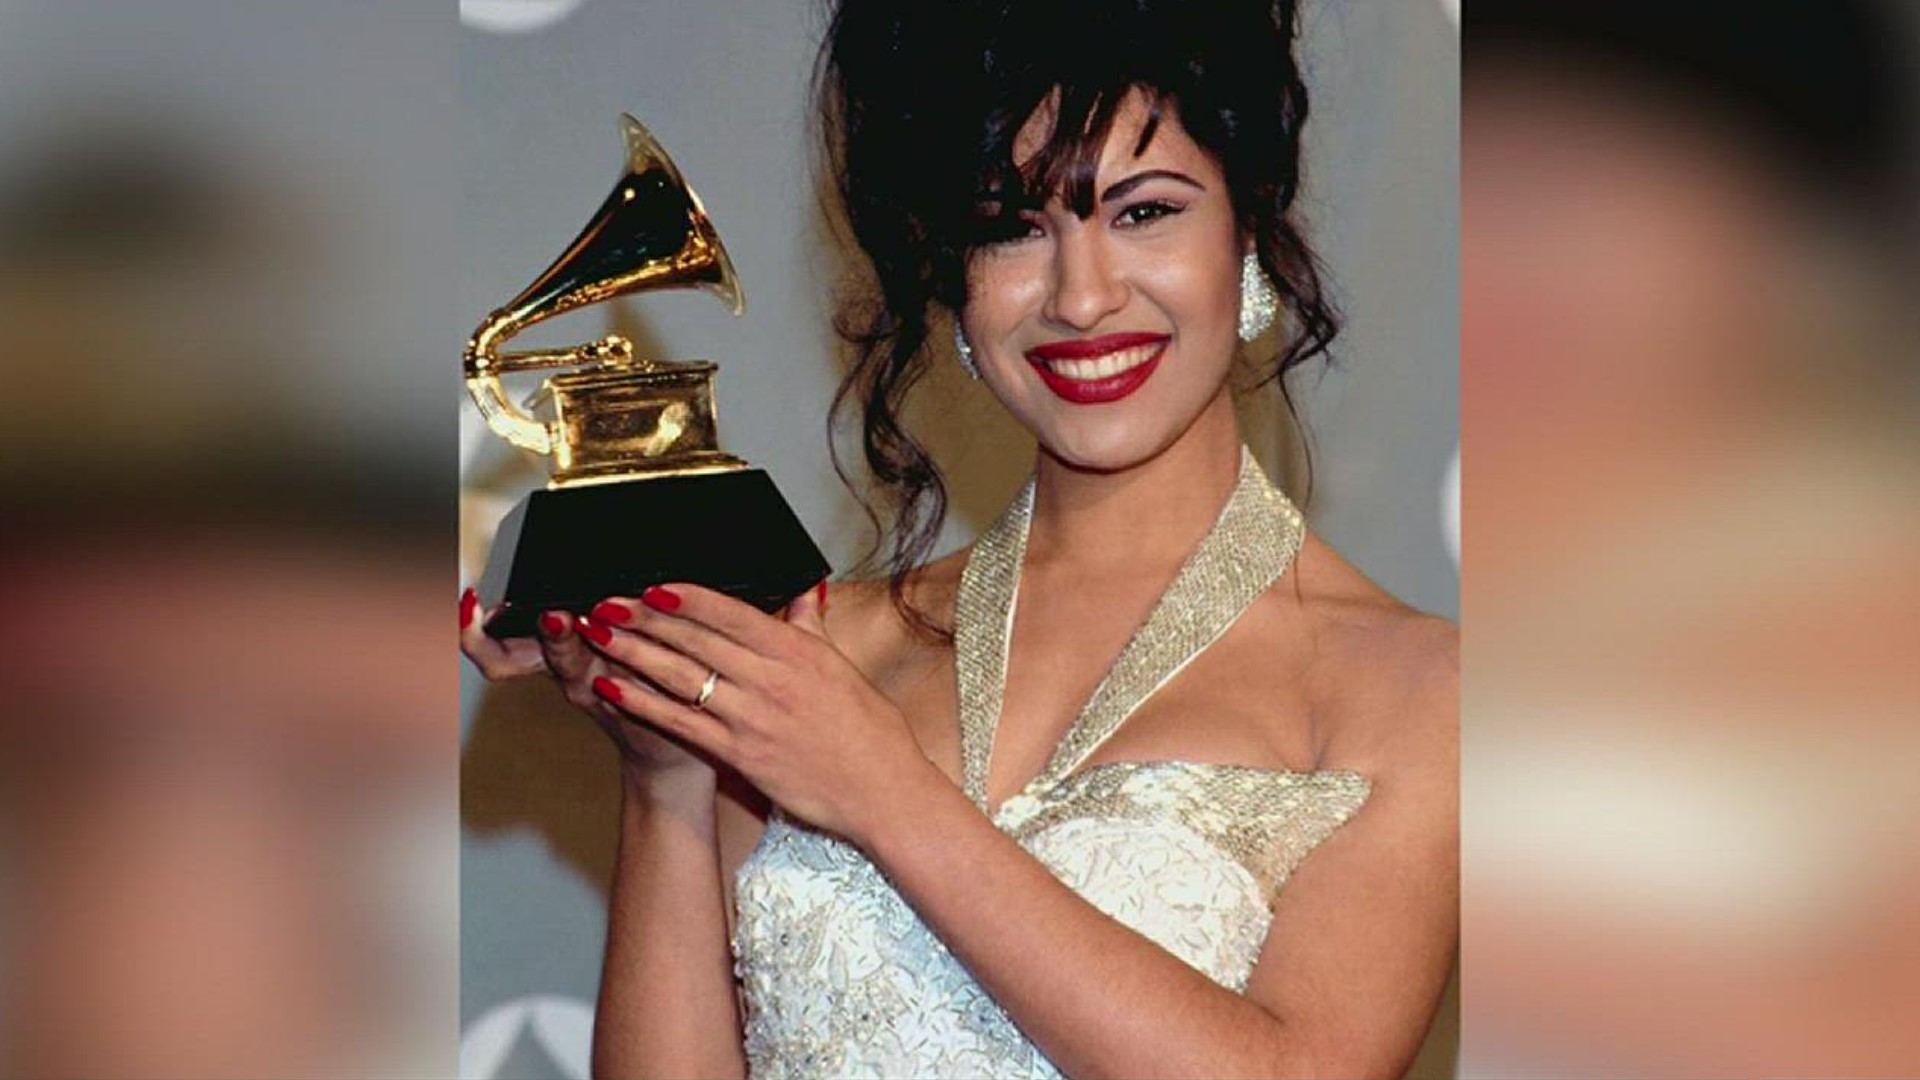 26 years after the passing of his daughter, Quintanilla said her memory is still being celebrated with a recent Grammy nomination.